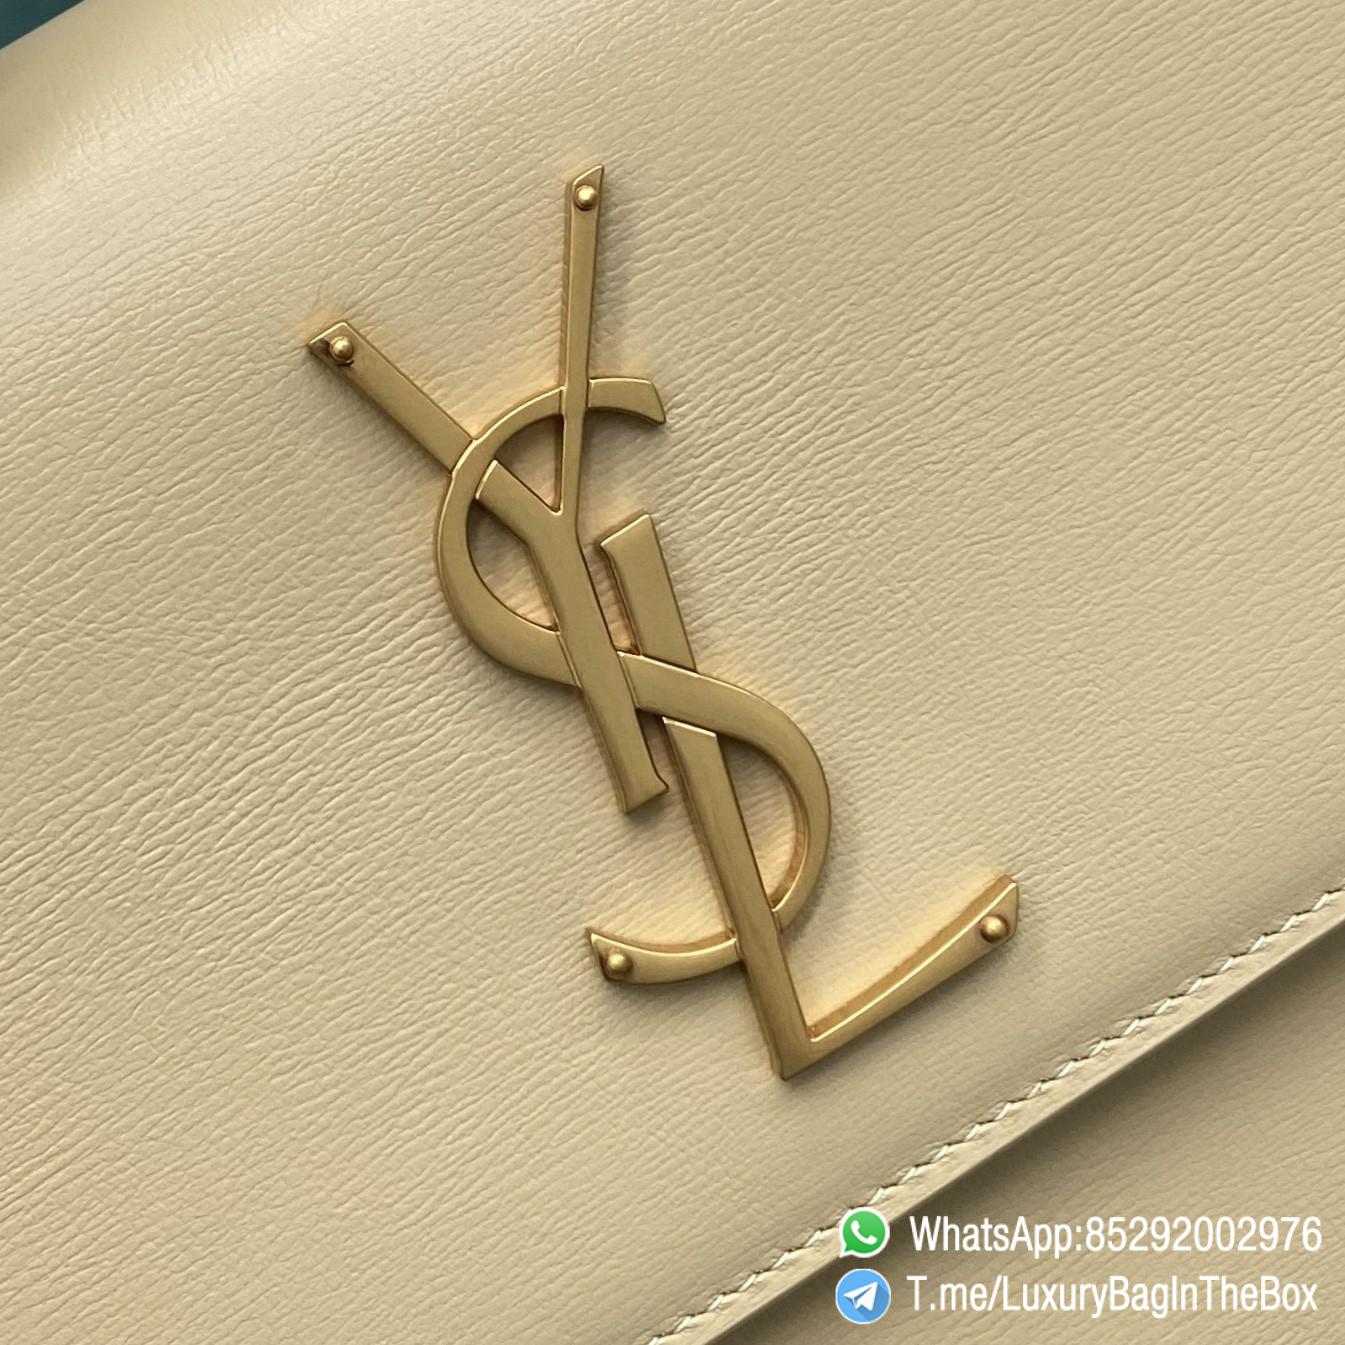 Best Replica YSL Sunset Satchel In Ivory Natural Smooth Leather with Front Flap Top Handle Chain and Leather Shoulder Strap Gold Metal YSL Initials SKU 634723D420W9141 09